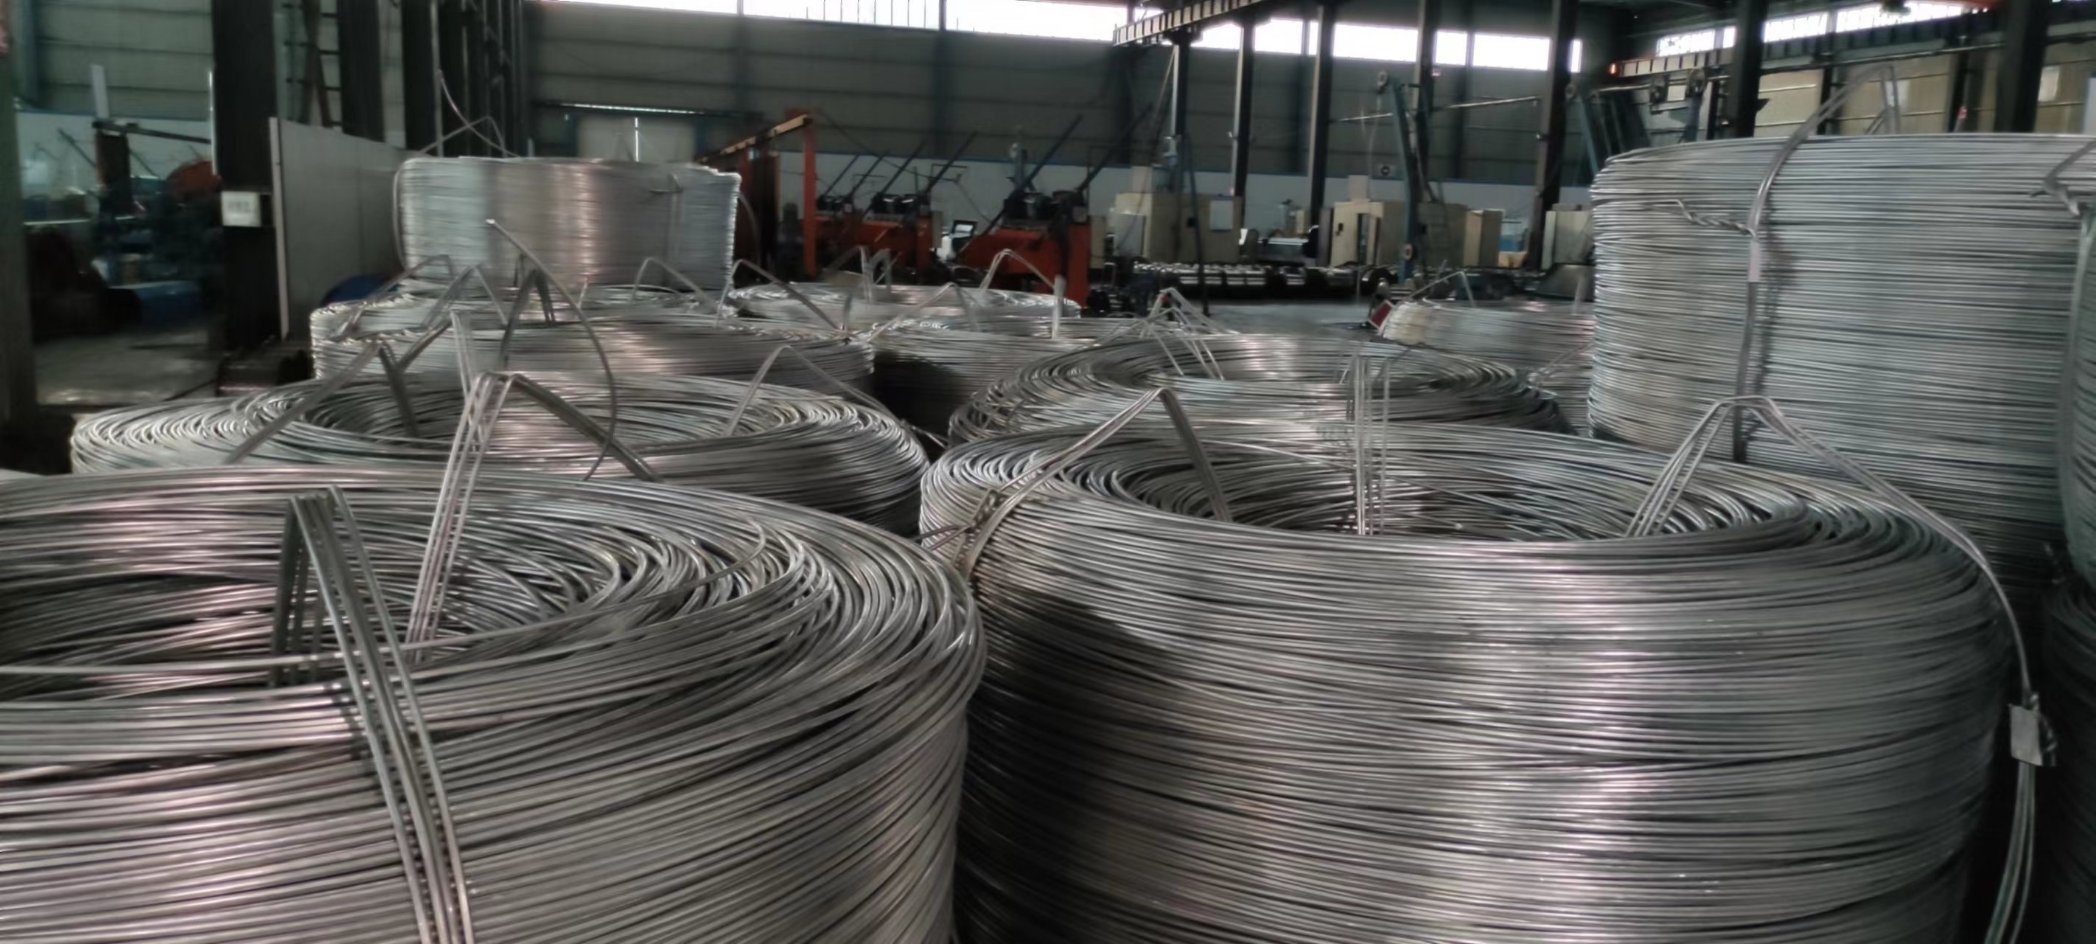 High Quality 1350 Aluminium Wire Rod 9.5mm for Electric Cable